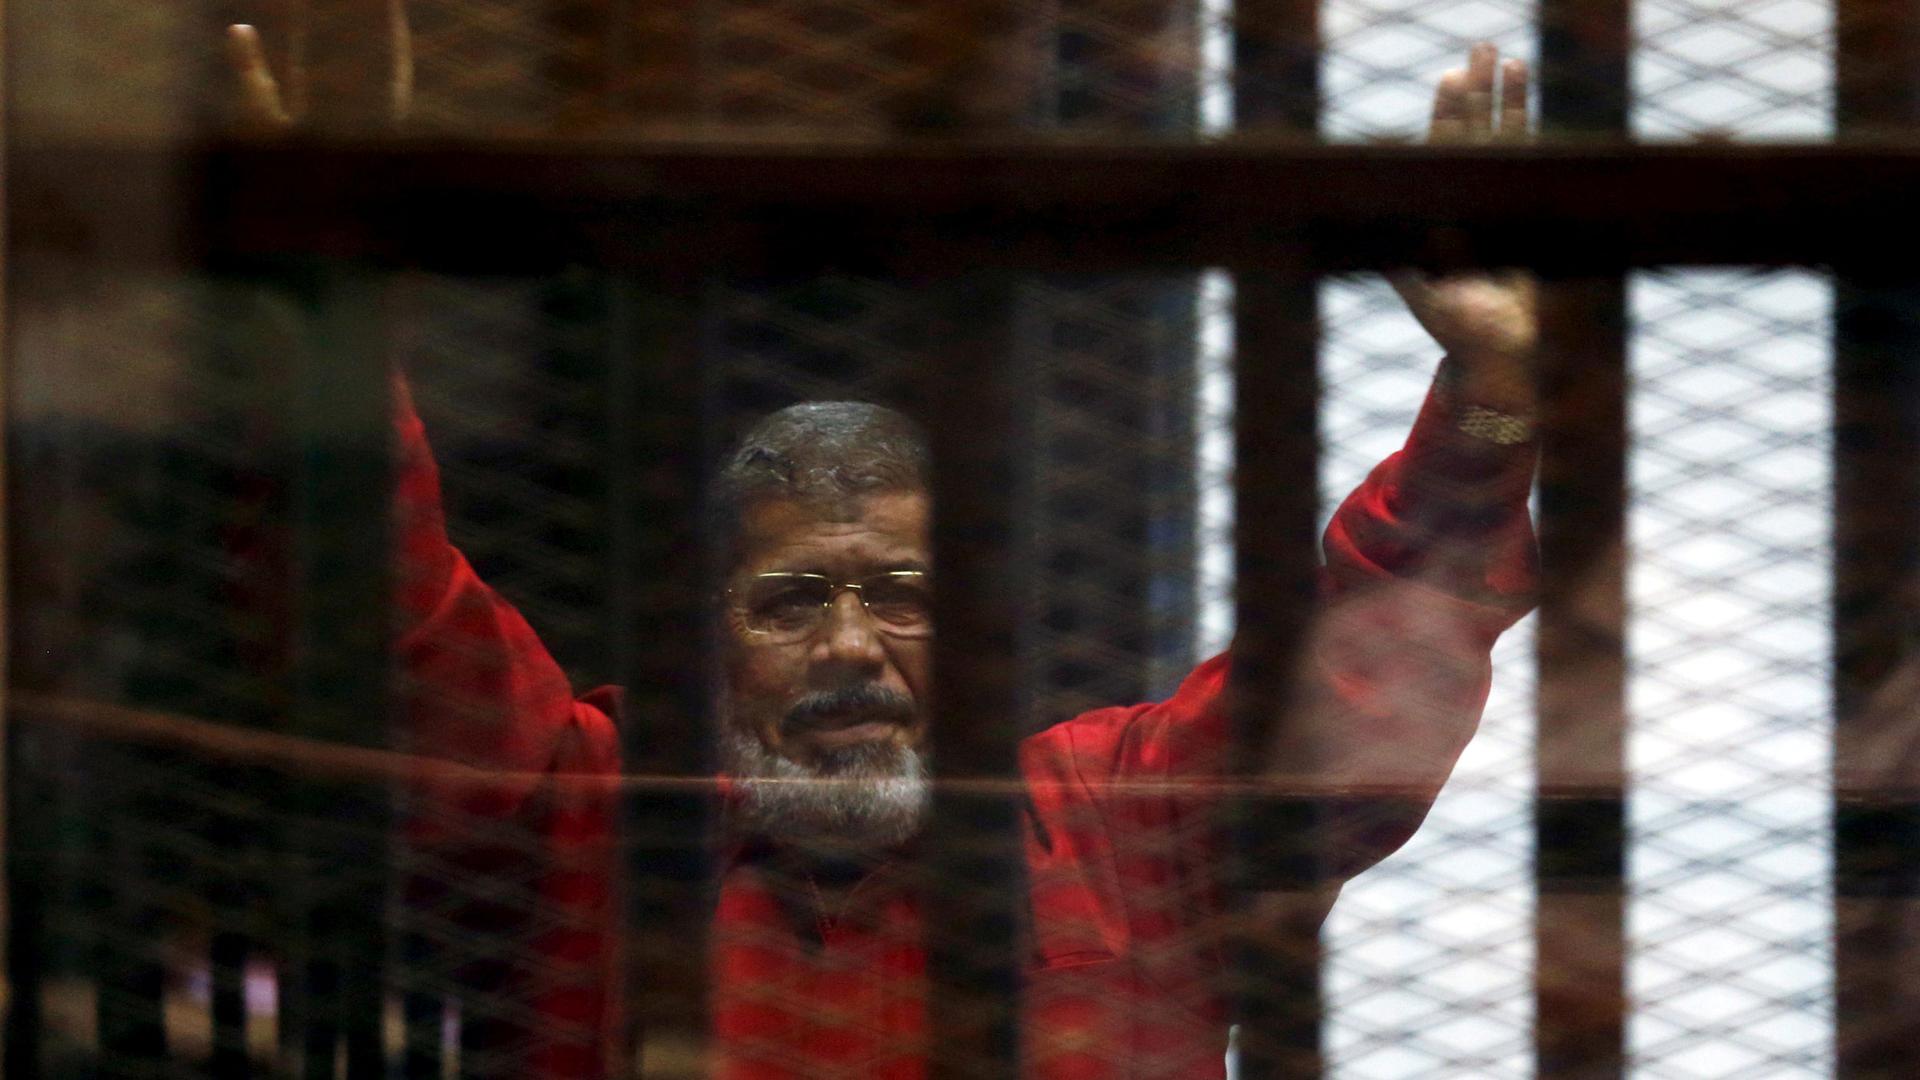 Mohammed Morsi is shown behind bars with his hands raised in the air.